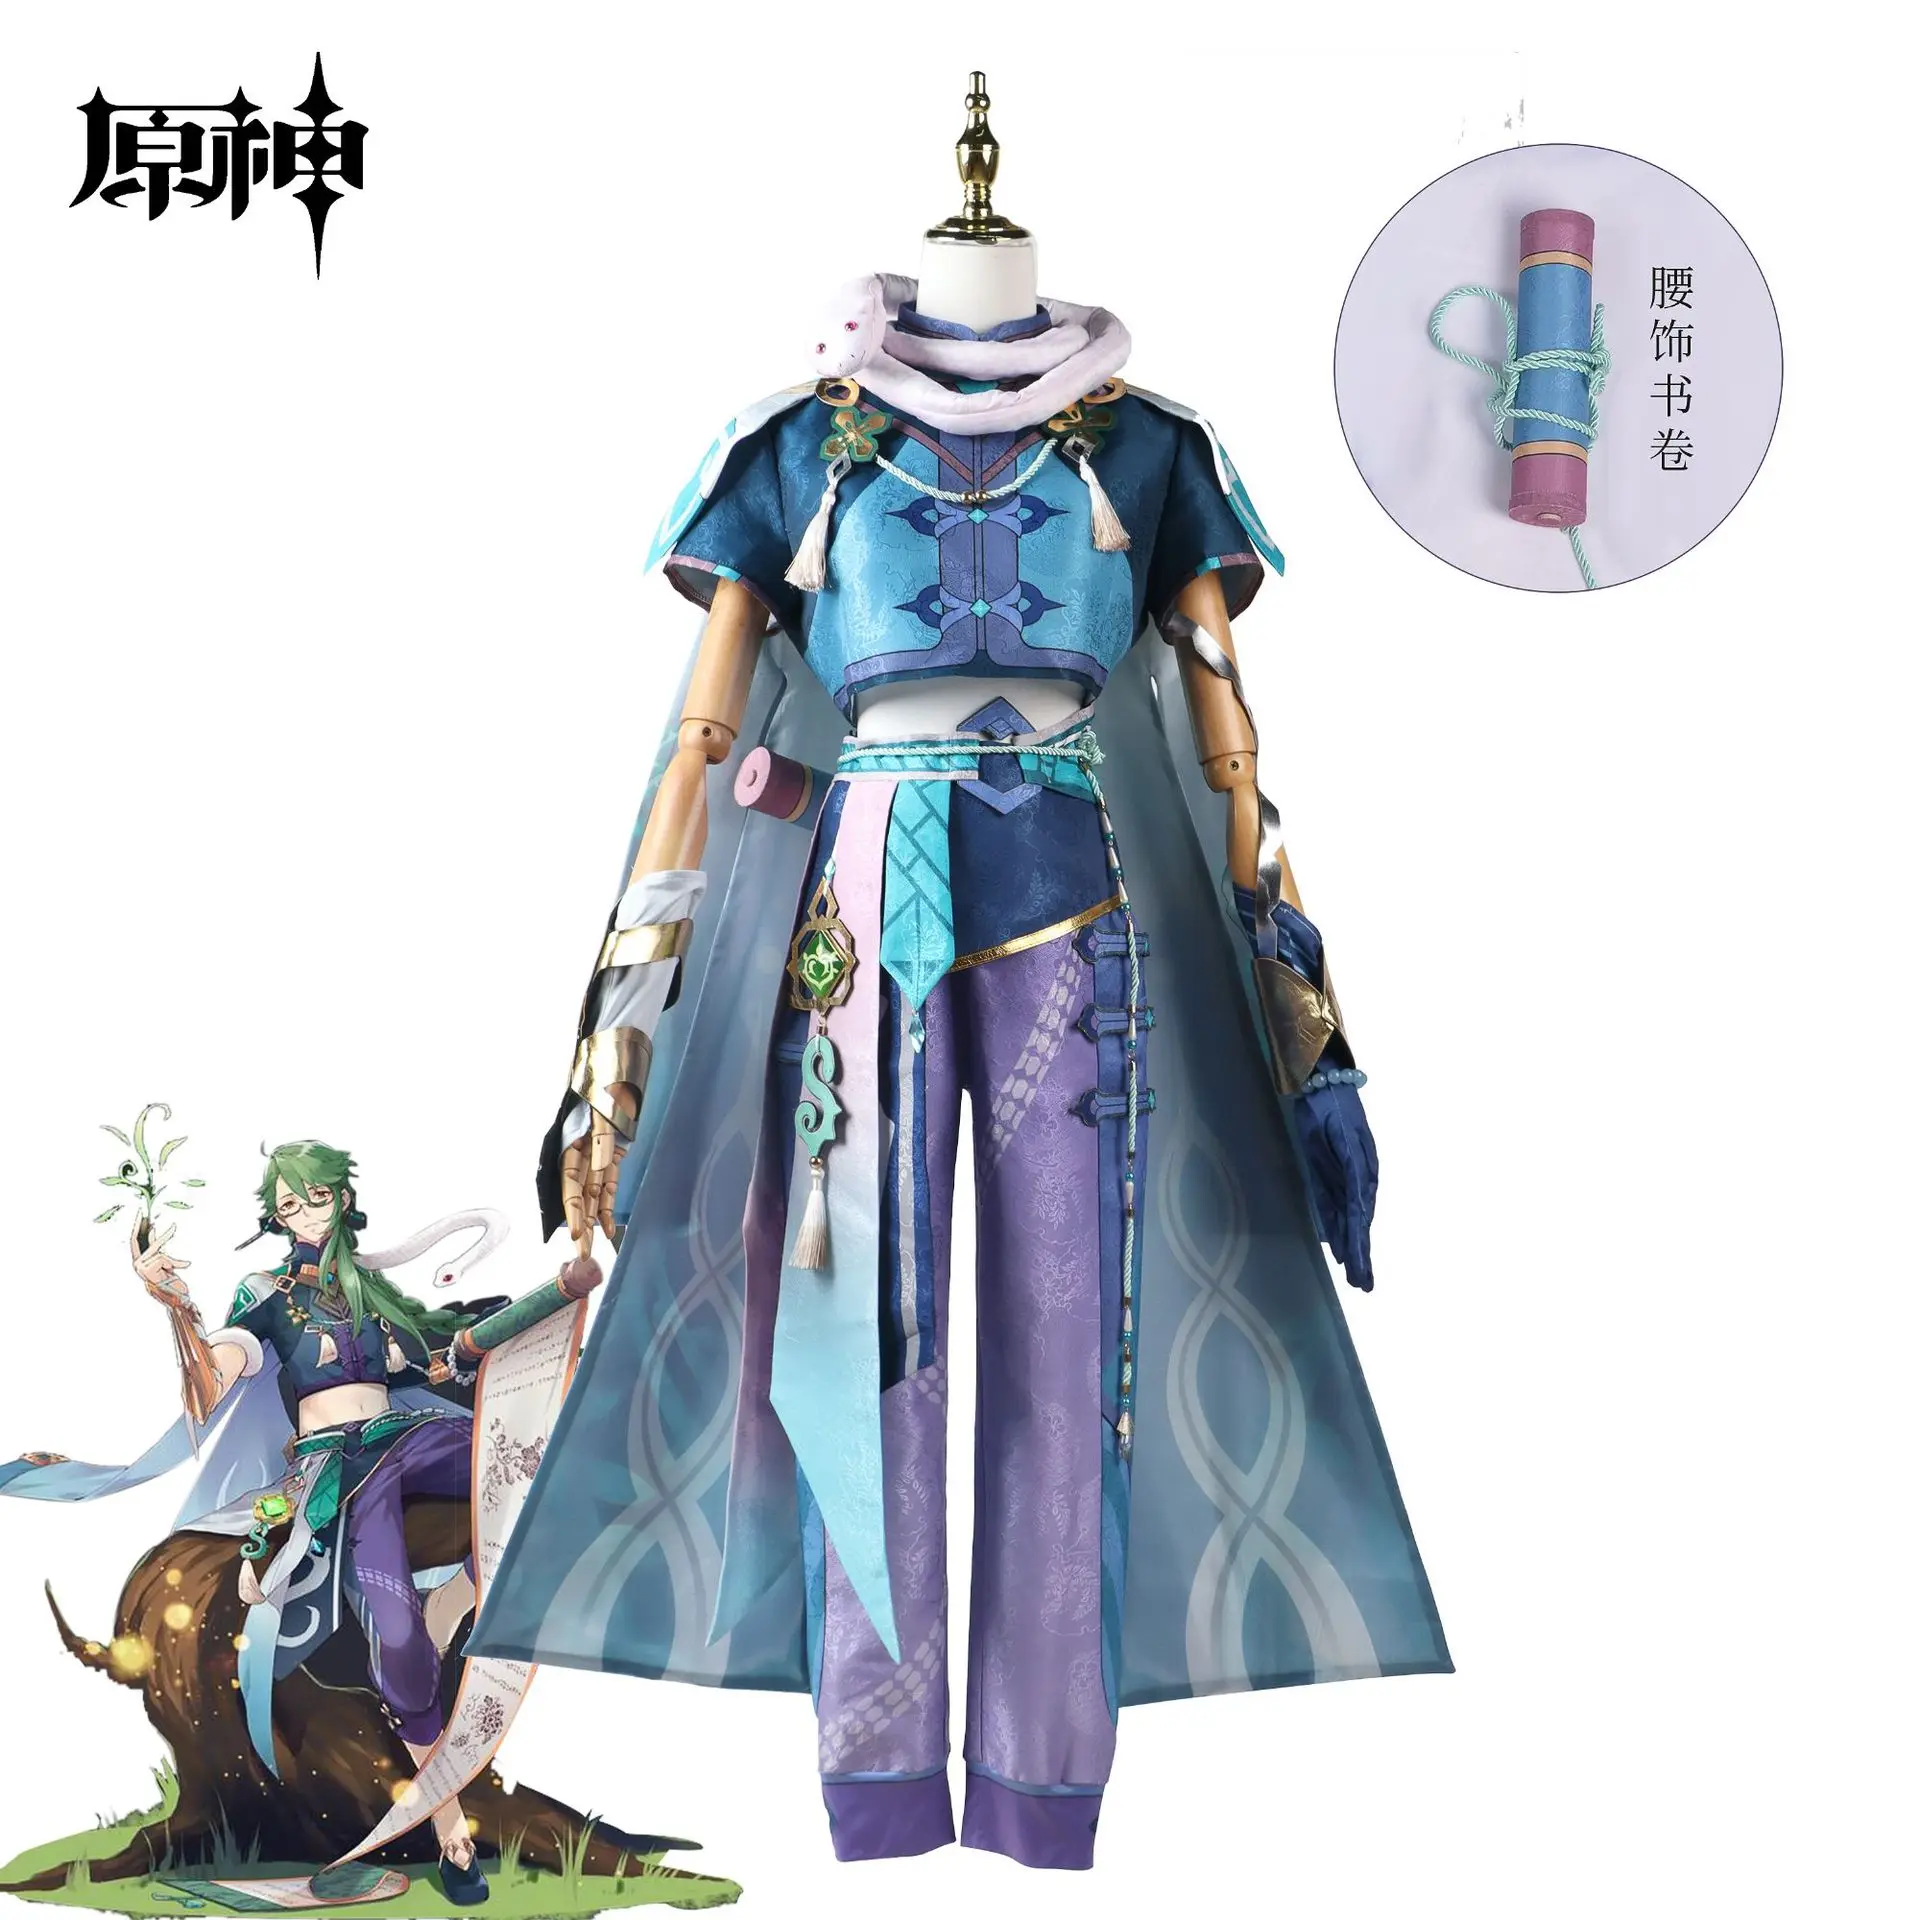 

Game Genshin Impact Baizhu Cosplay Costume Top Pants Cloak Outfits Fantasia Anime Men Male Halloween Carnival Disguise Clothes